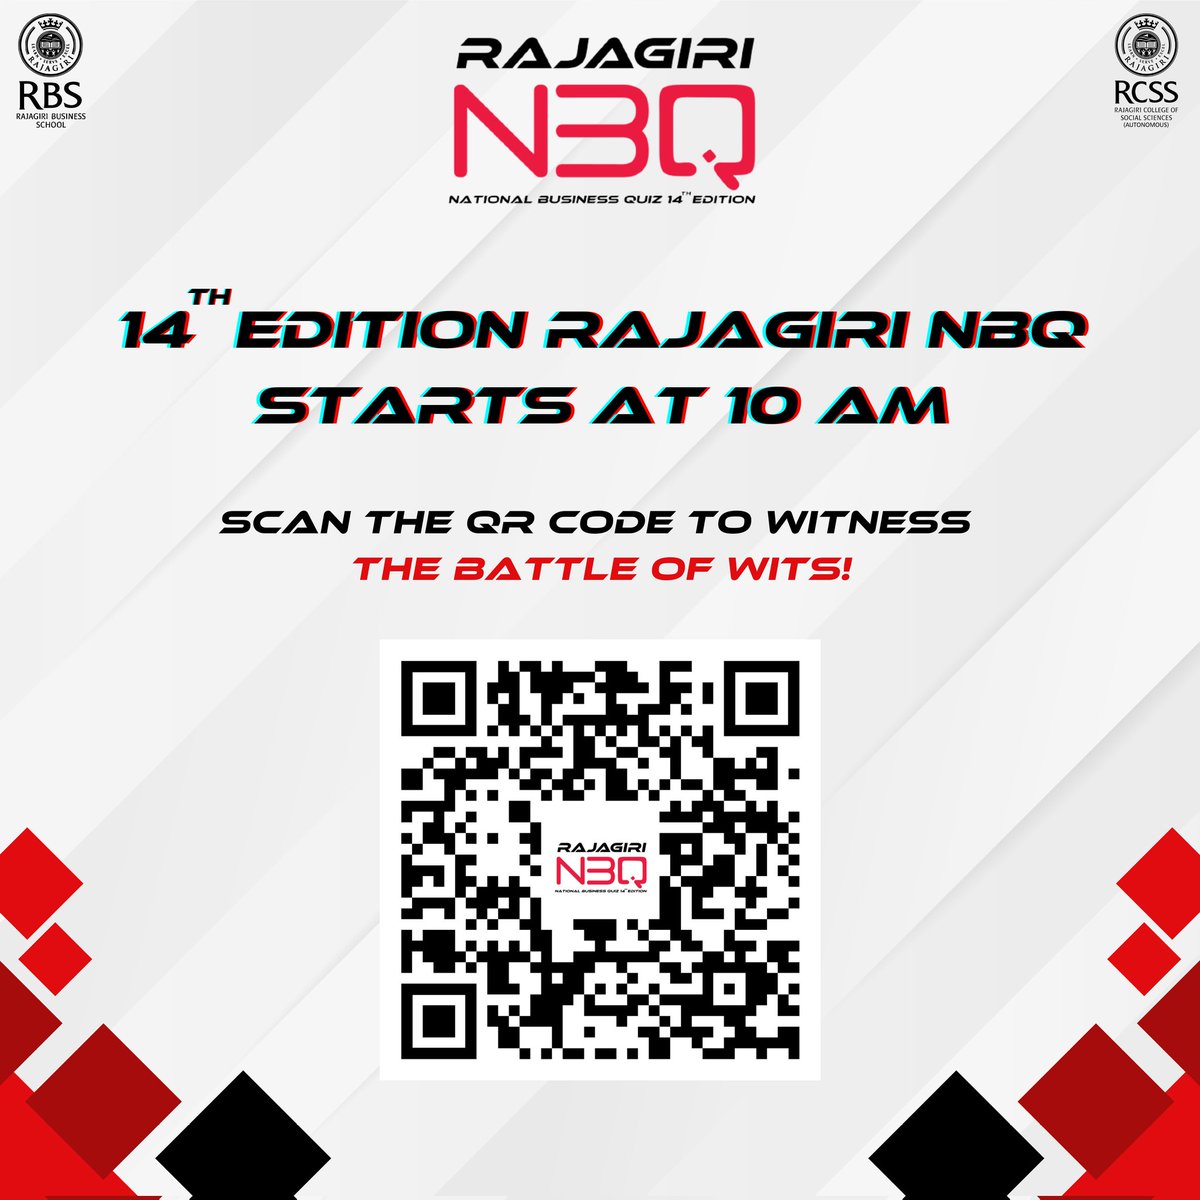 Unleashing the Power of the Sword of Intellect! 🔥✨ 

Join us at the spectacular Rajagiri NBQ 14th edition at 10AM and witness the ultimate battle of minds!💪

 #TheBattleIsOn🌟
#rnbq #rajagiri  #kochi #mostawaited #battleofminds #battleison #nationalquiz #businessquiz #finals